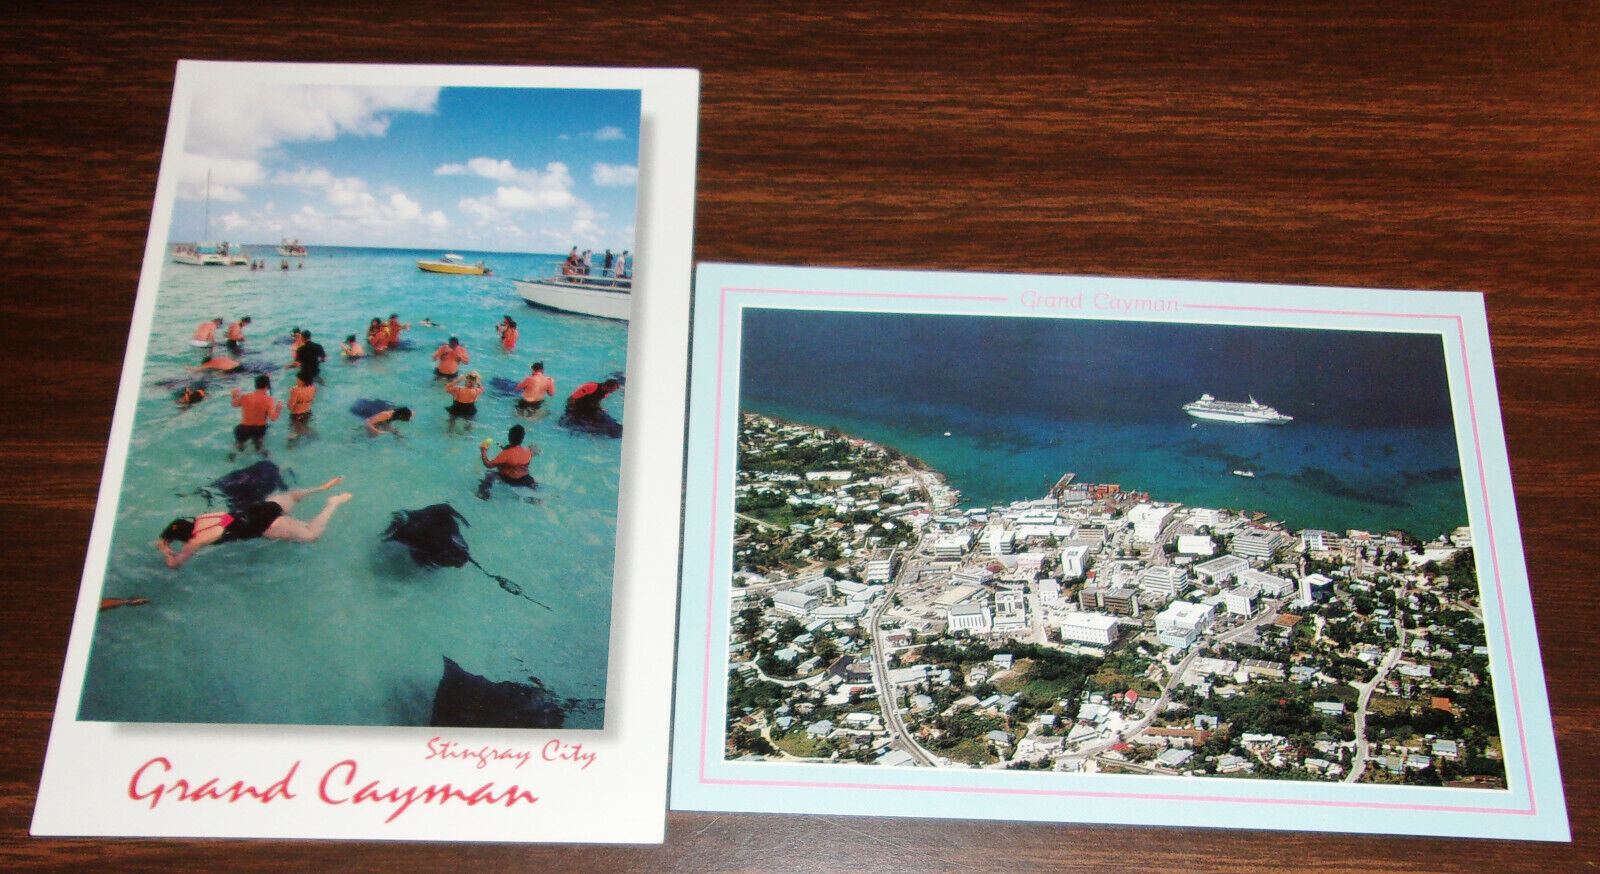 2 Postcards - UNUSED - 20 to 25 Yrs Old - Grand Cayman